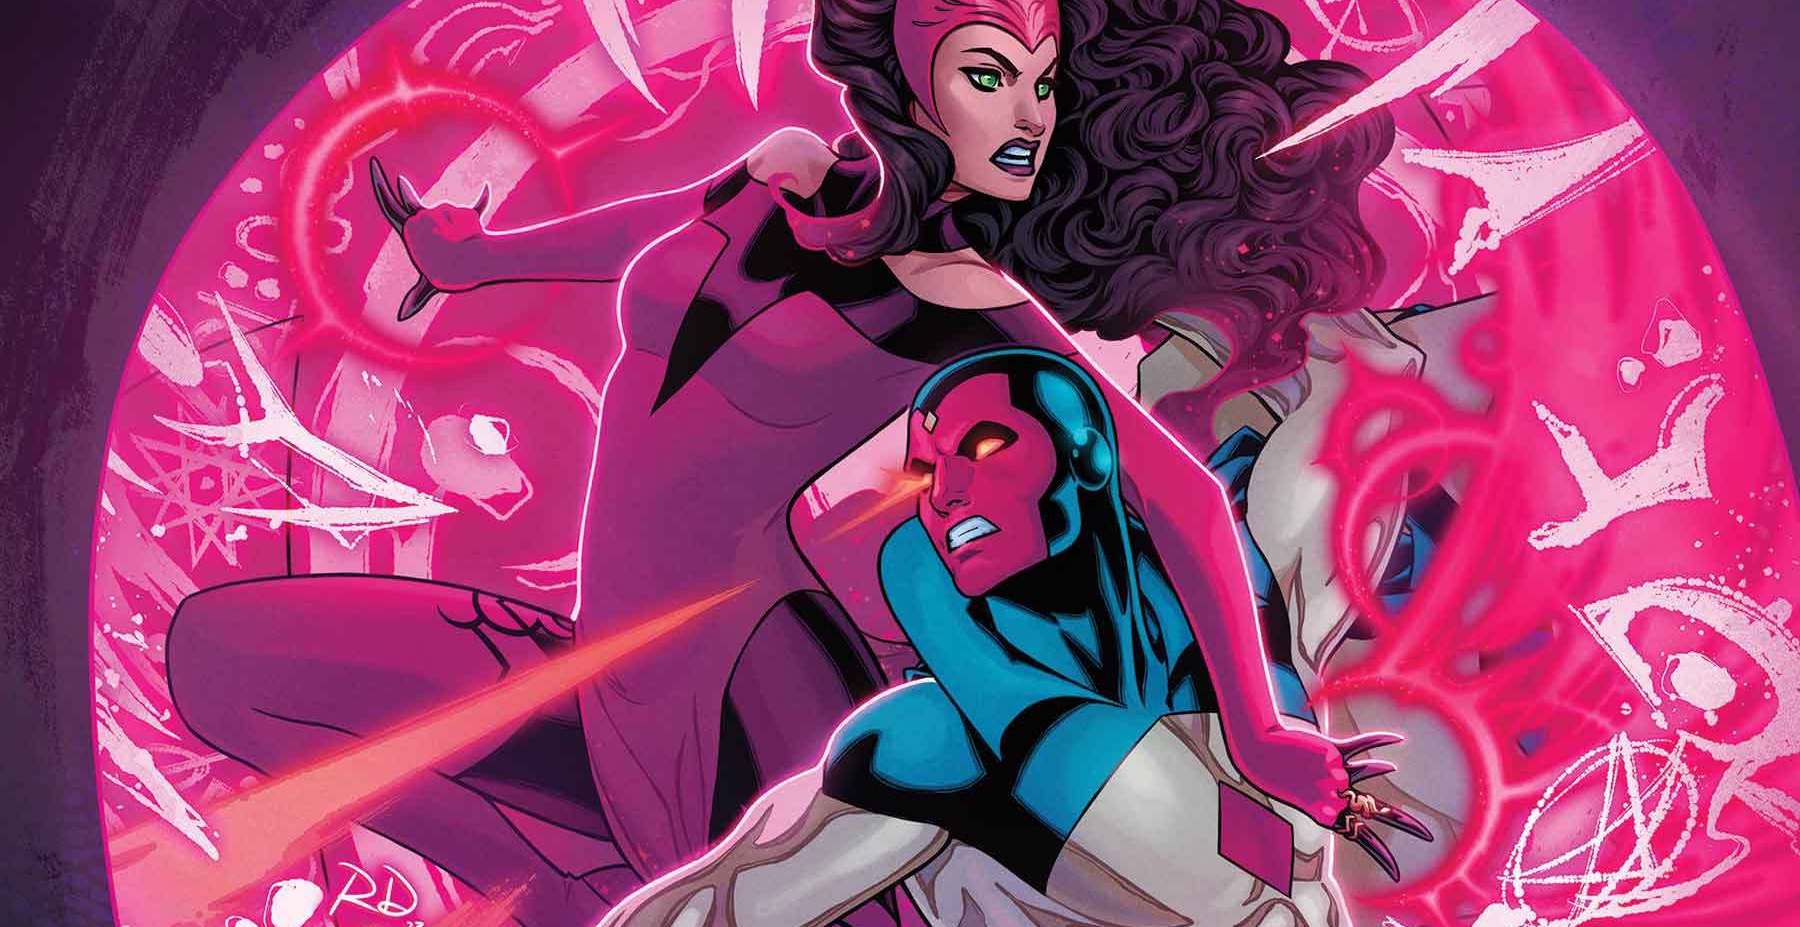 EXCLUSIVE Marvel First Look: Scarlet Witch & Quicksilver #2 • AIPT